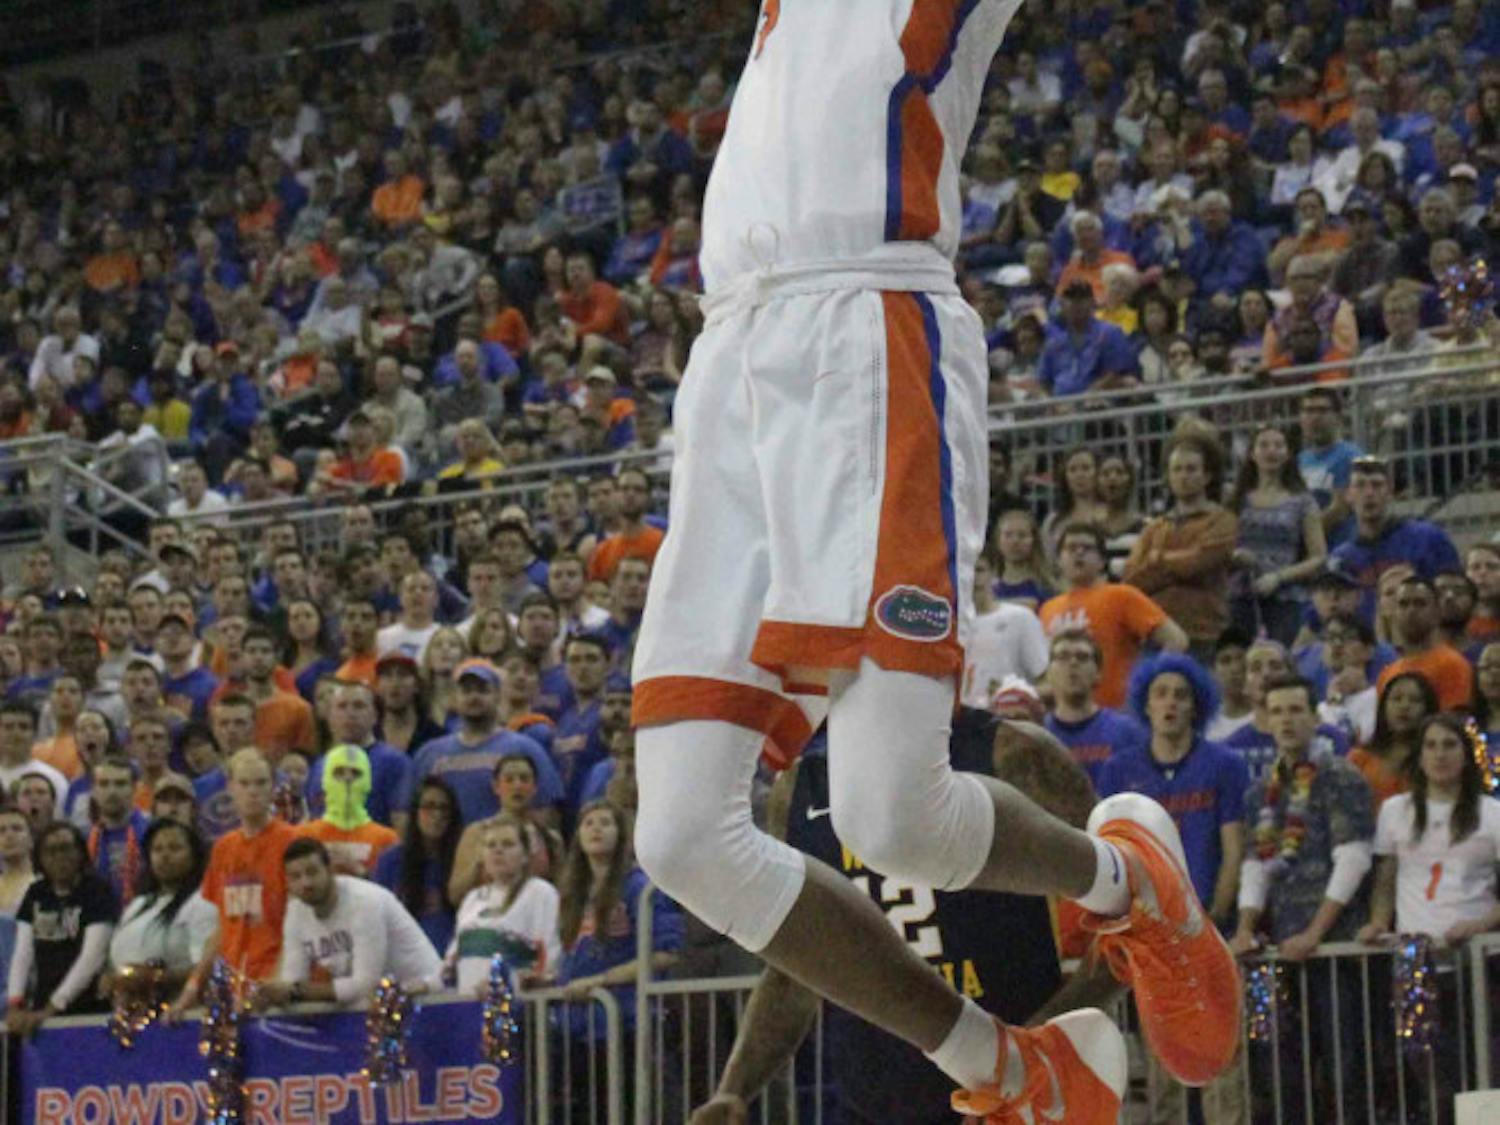 Devin Robinson goes for a layup during Florida’s win over West Virginia on Jan. 30, 2016, in the O’Connell Center.